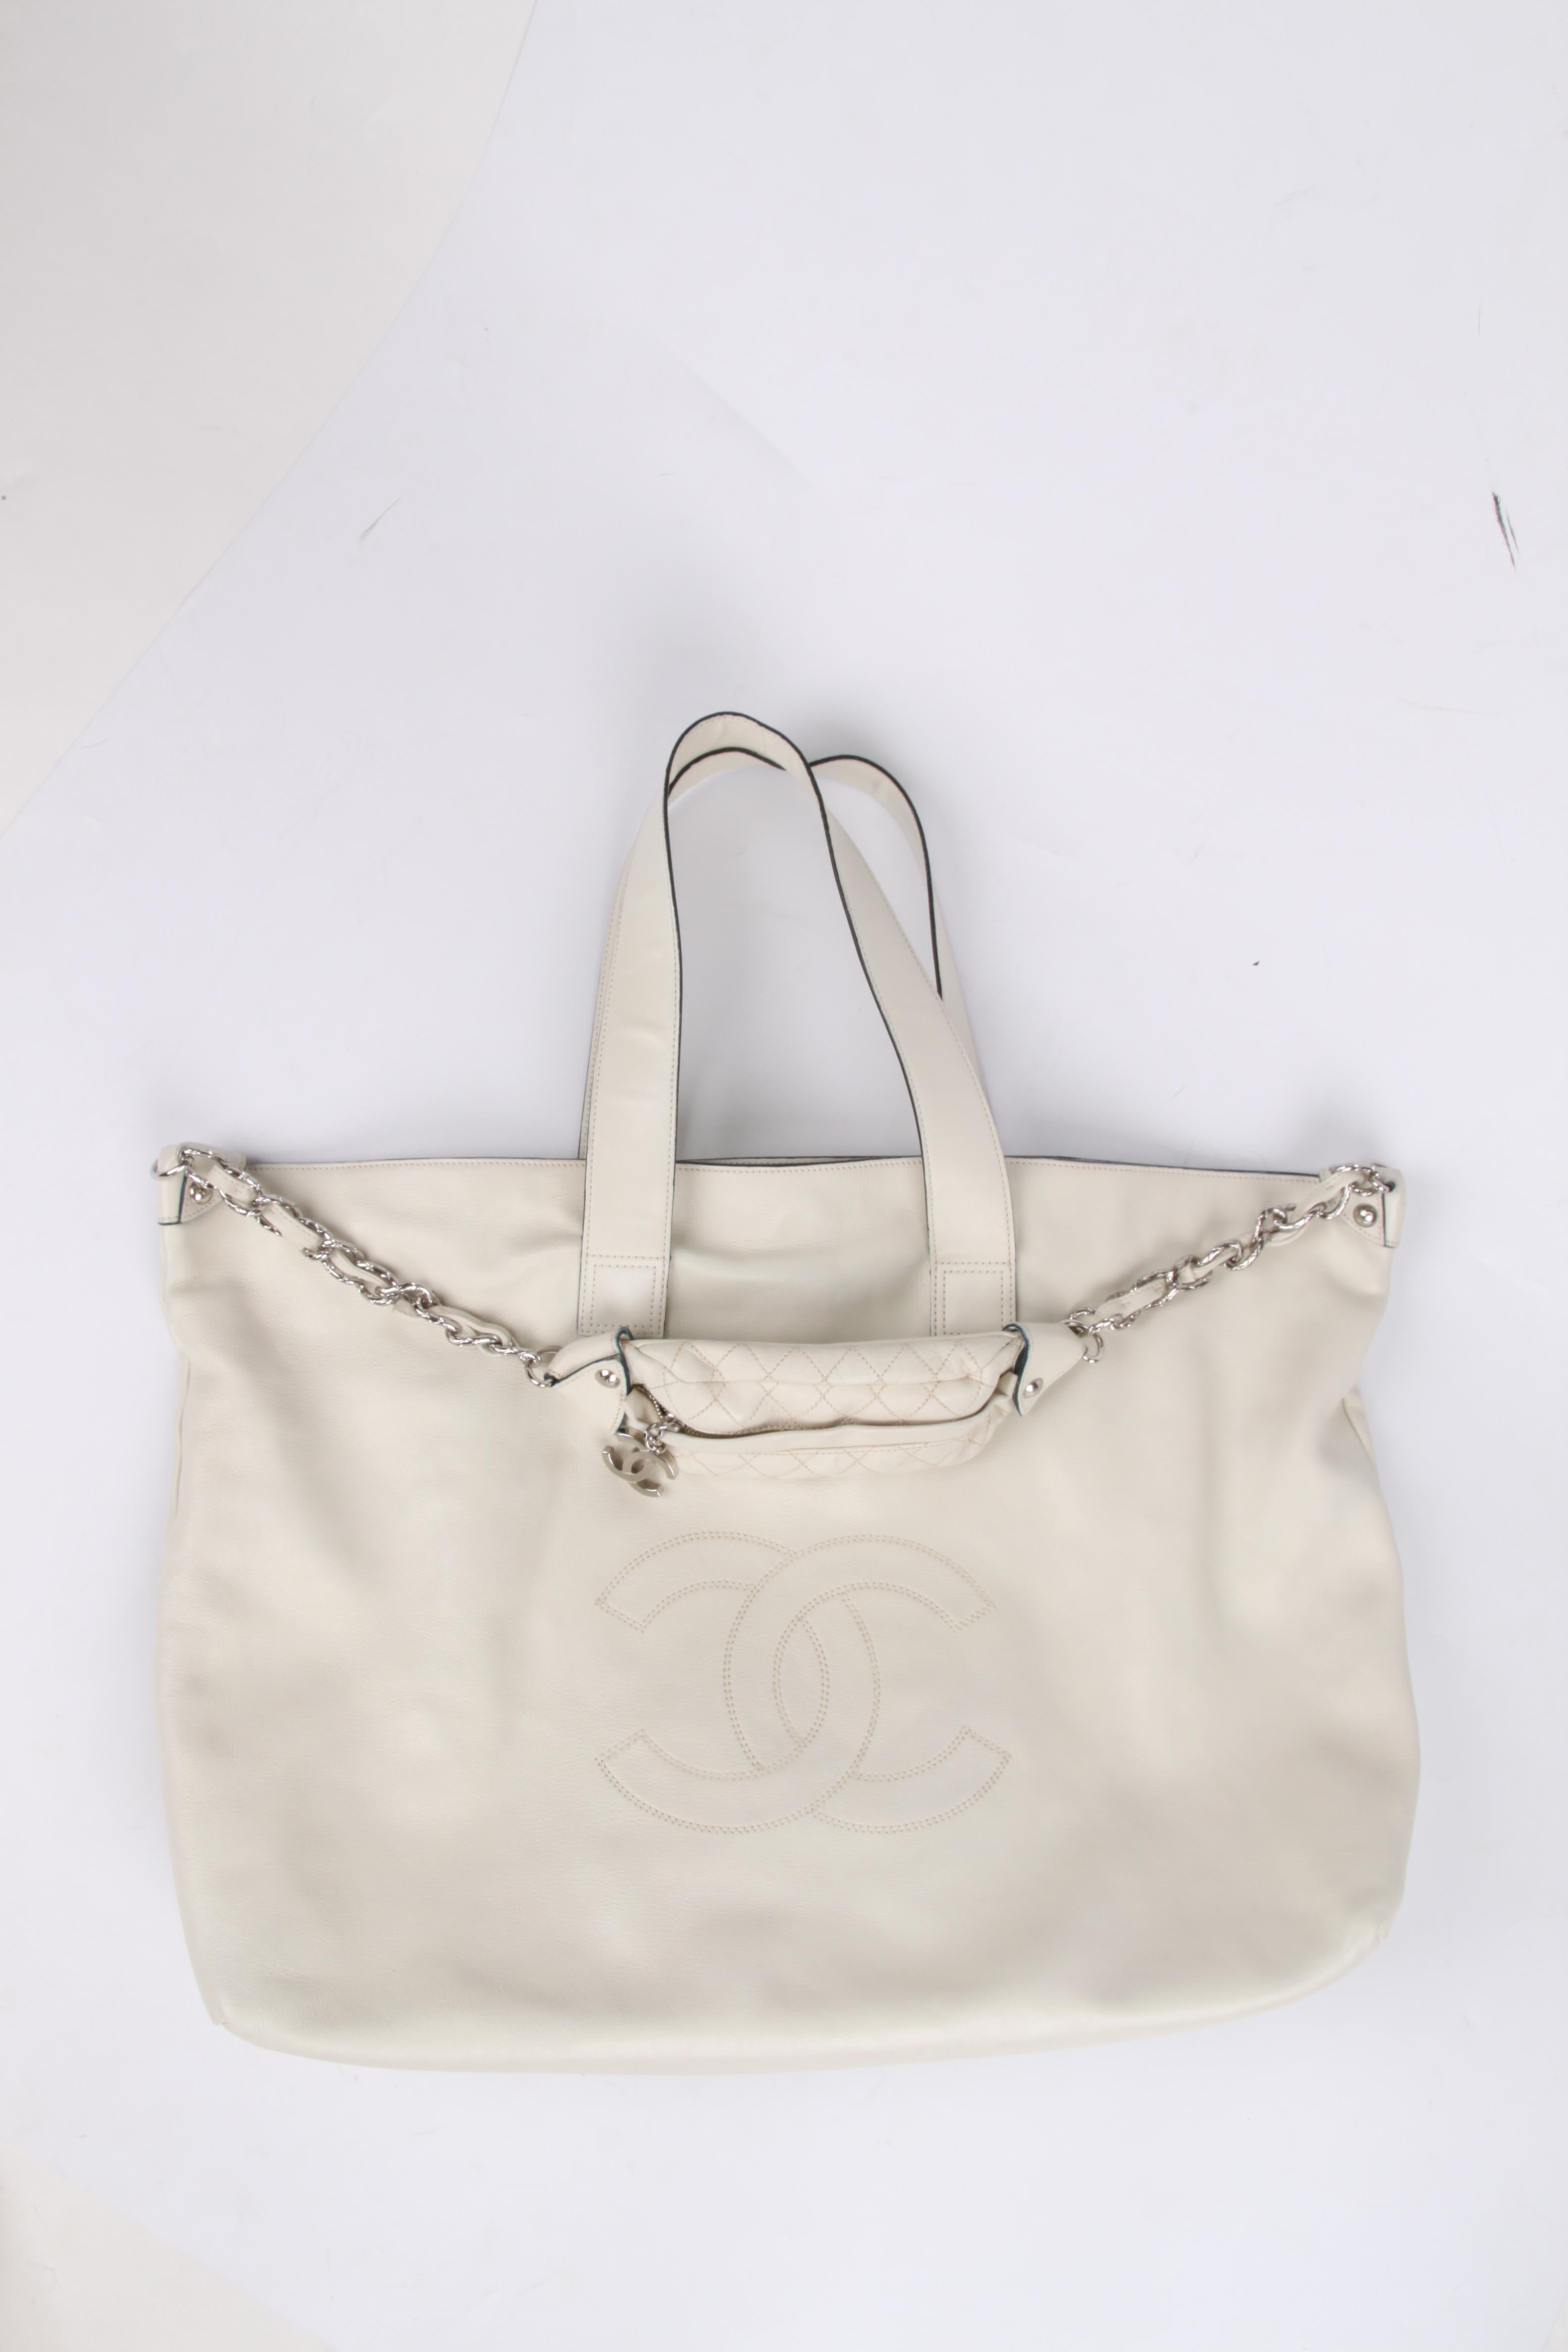 Chanel Shopper Bag - off-white In Excellent Condition For Sale In Baarn, NL